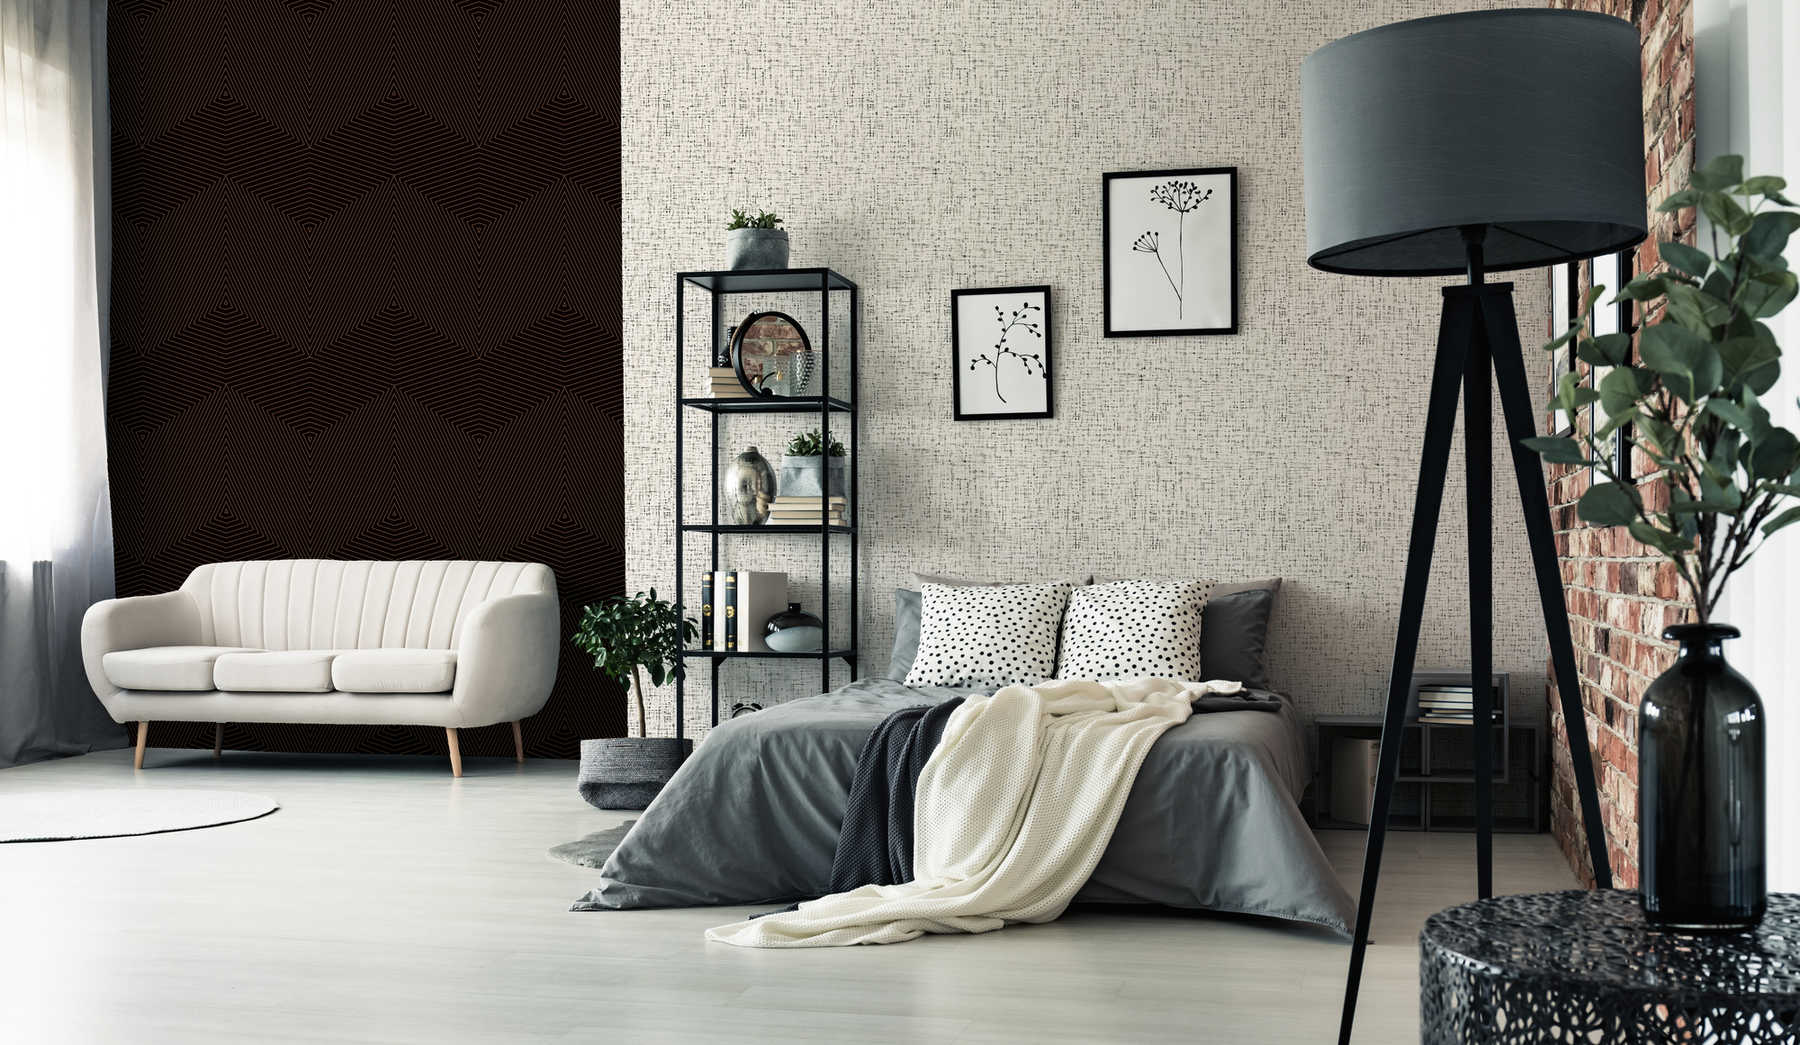             Non-woven wallpaper lined with metallic effect - black, bronze
        